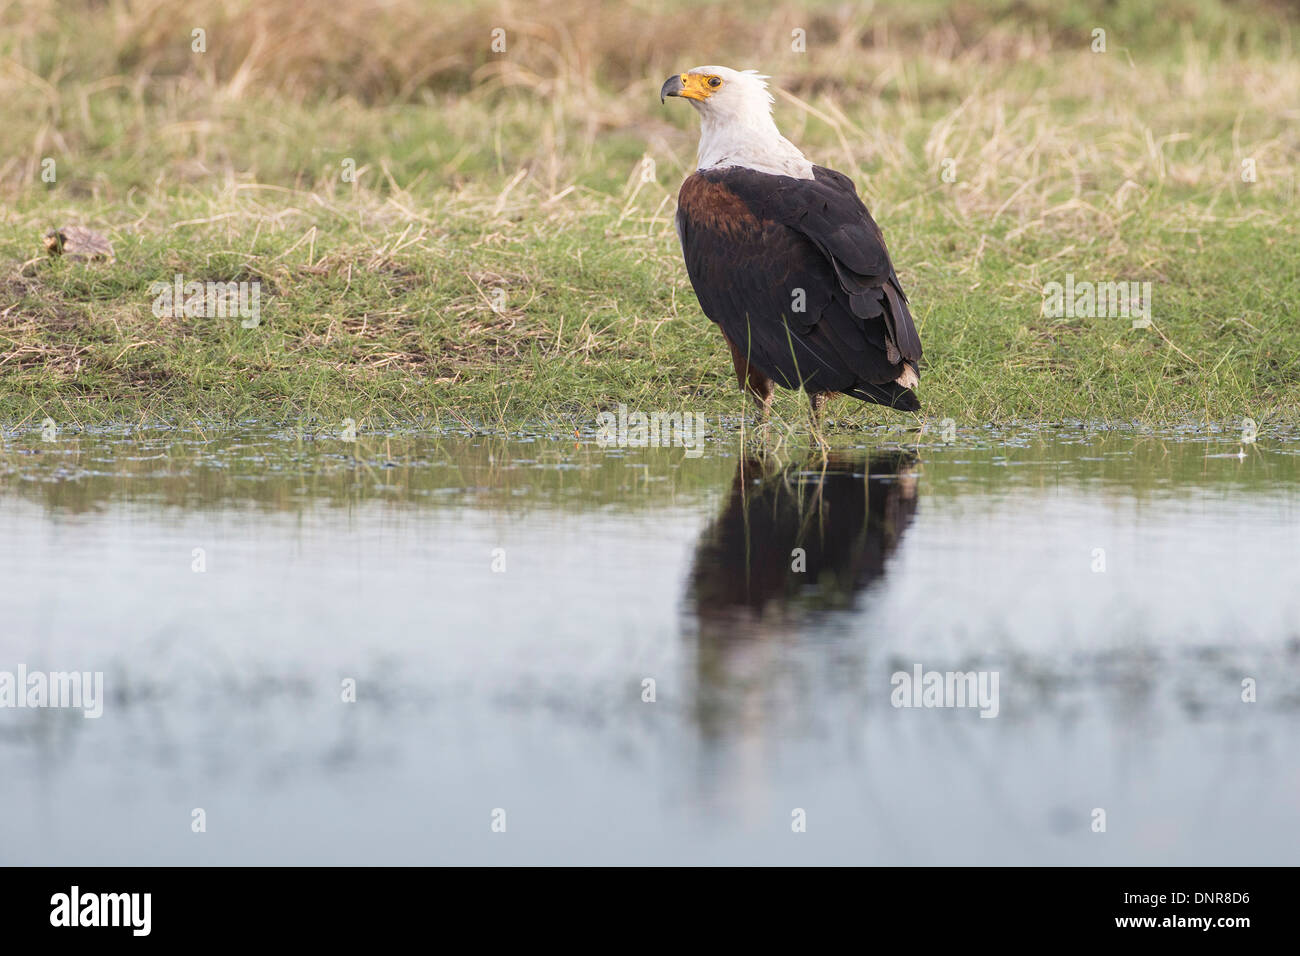 African fish eagle (Haliaeetus vocifer) at the Liuwa Plains national park in north-western Zambia. Stock Photo